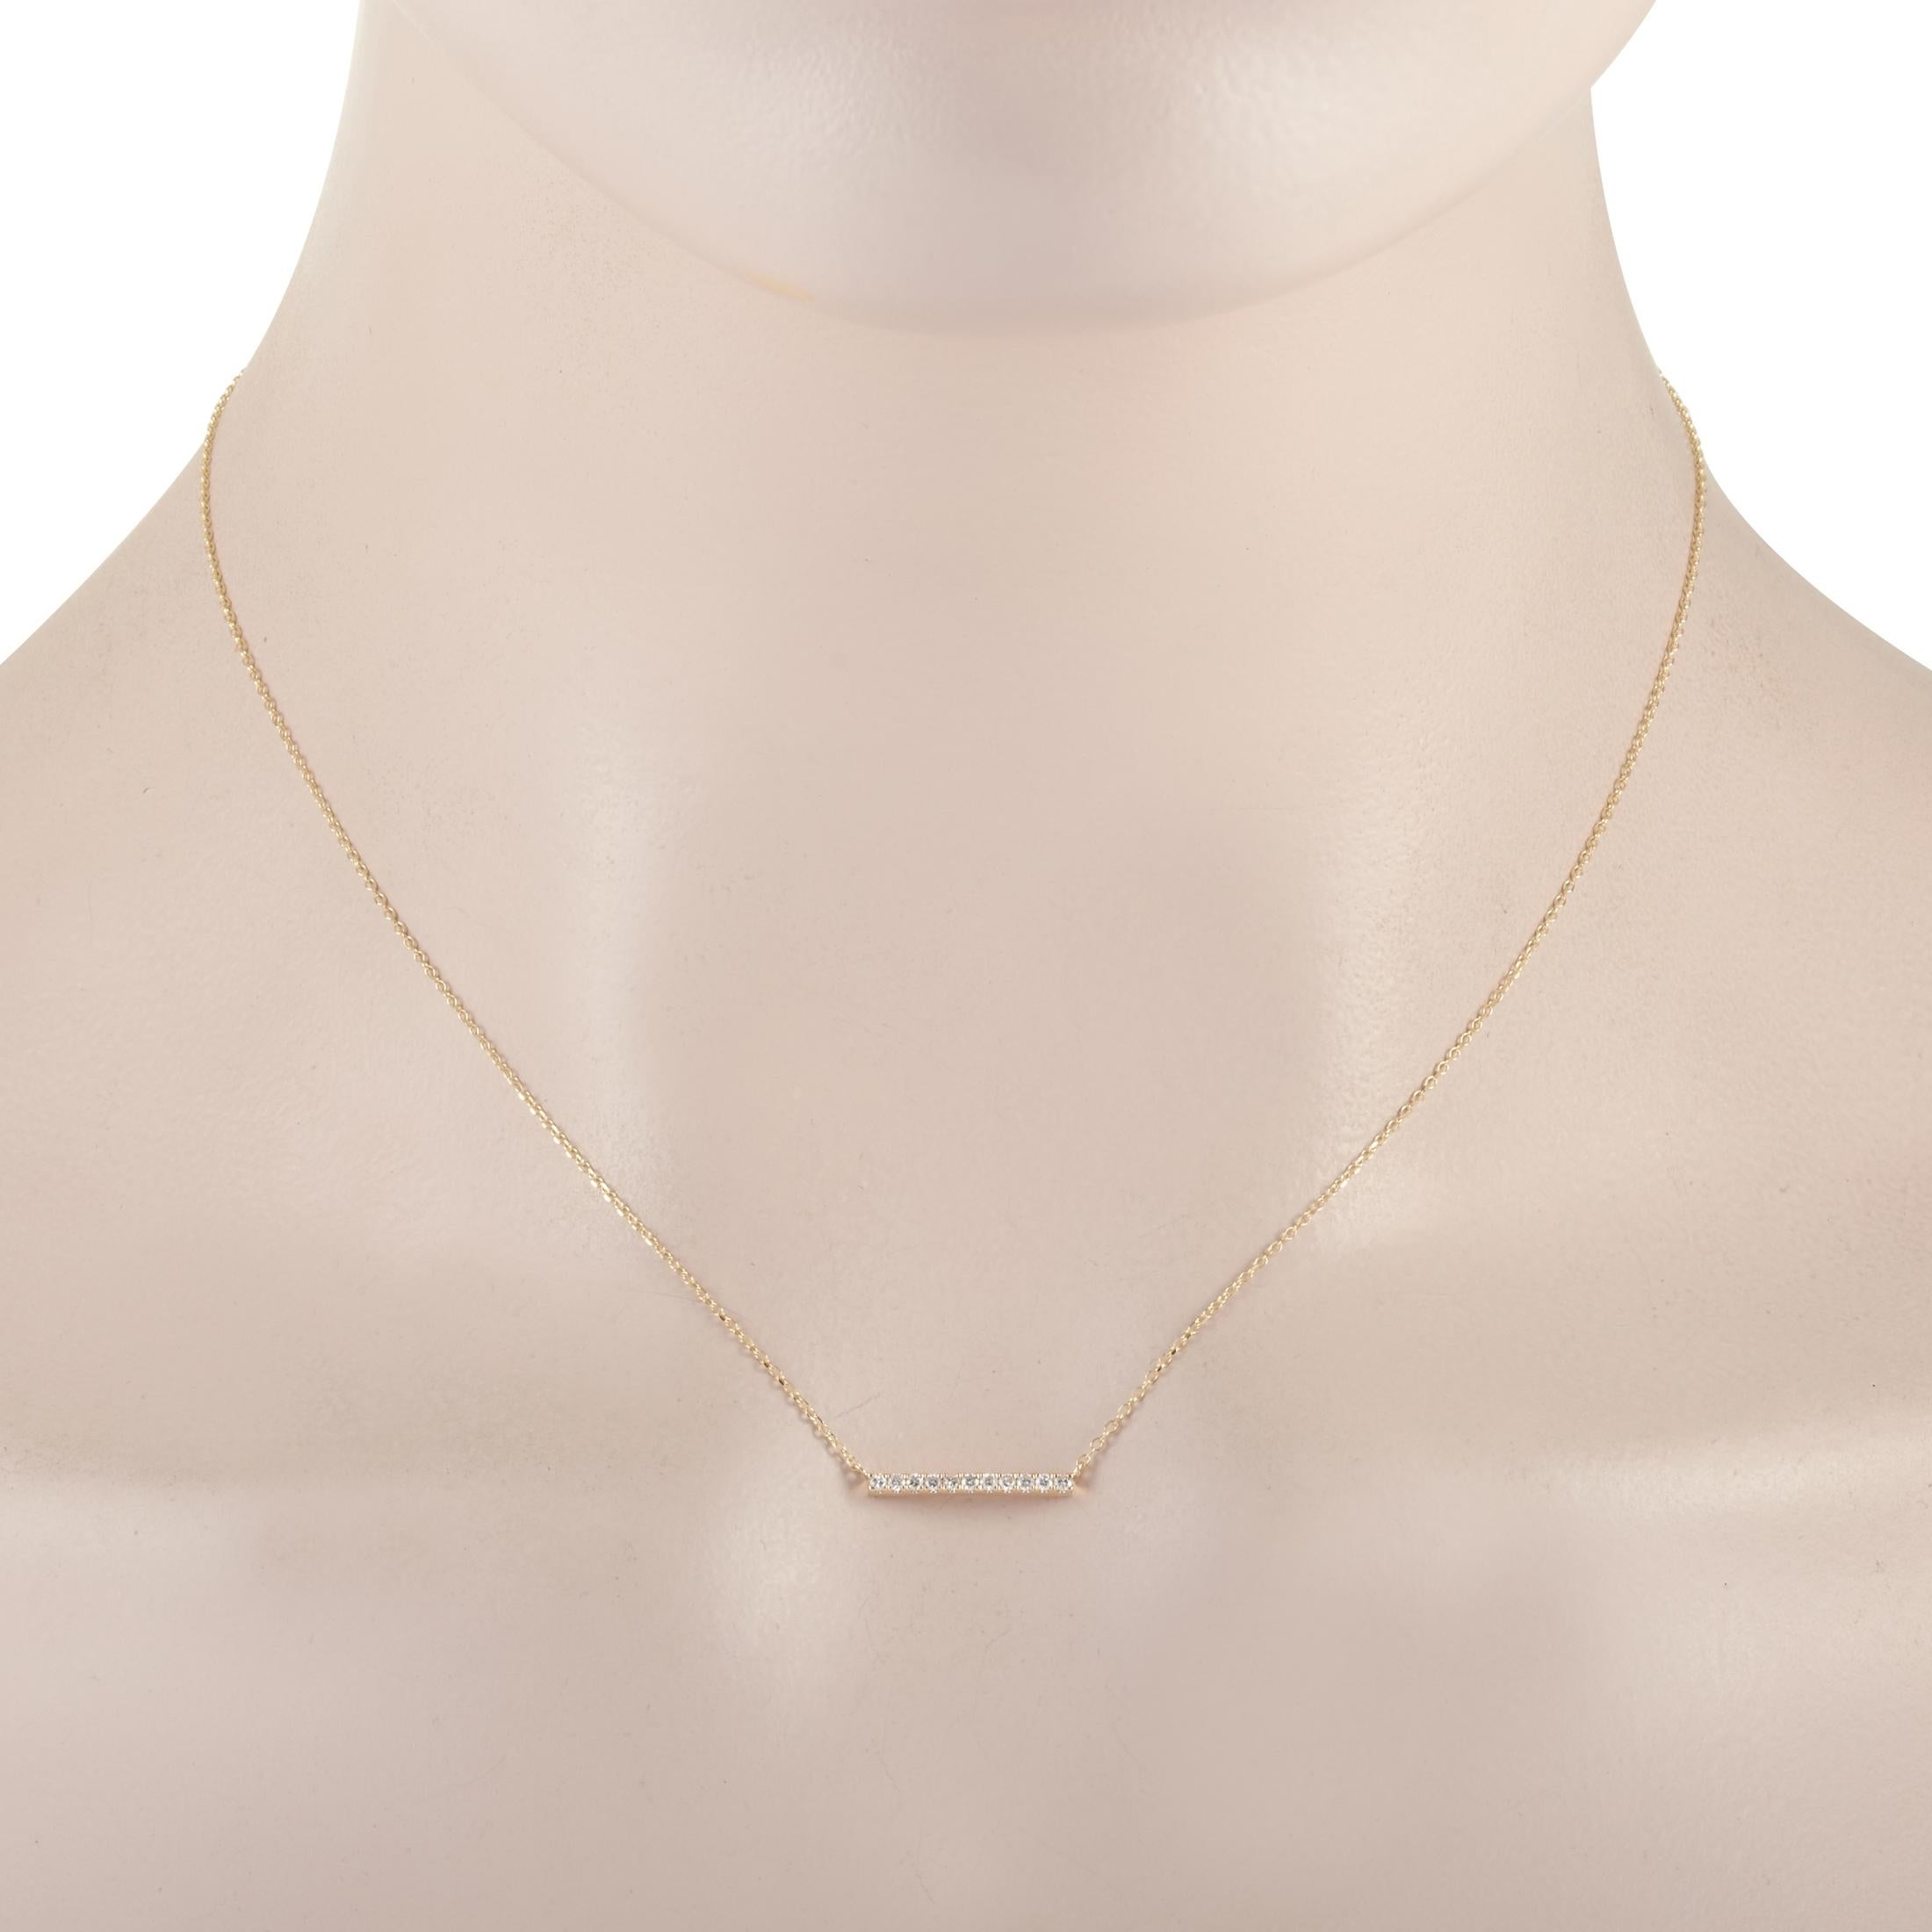 This LB Exclusive necklace is crafted from 14K yellow gold and weighs 1.6 grams. It is presented with a 15” chain and boasts a pendant that measures 0.07” in length and 0.63” in width. The necklace is set with diamonds that total 0.10